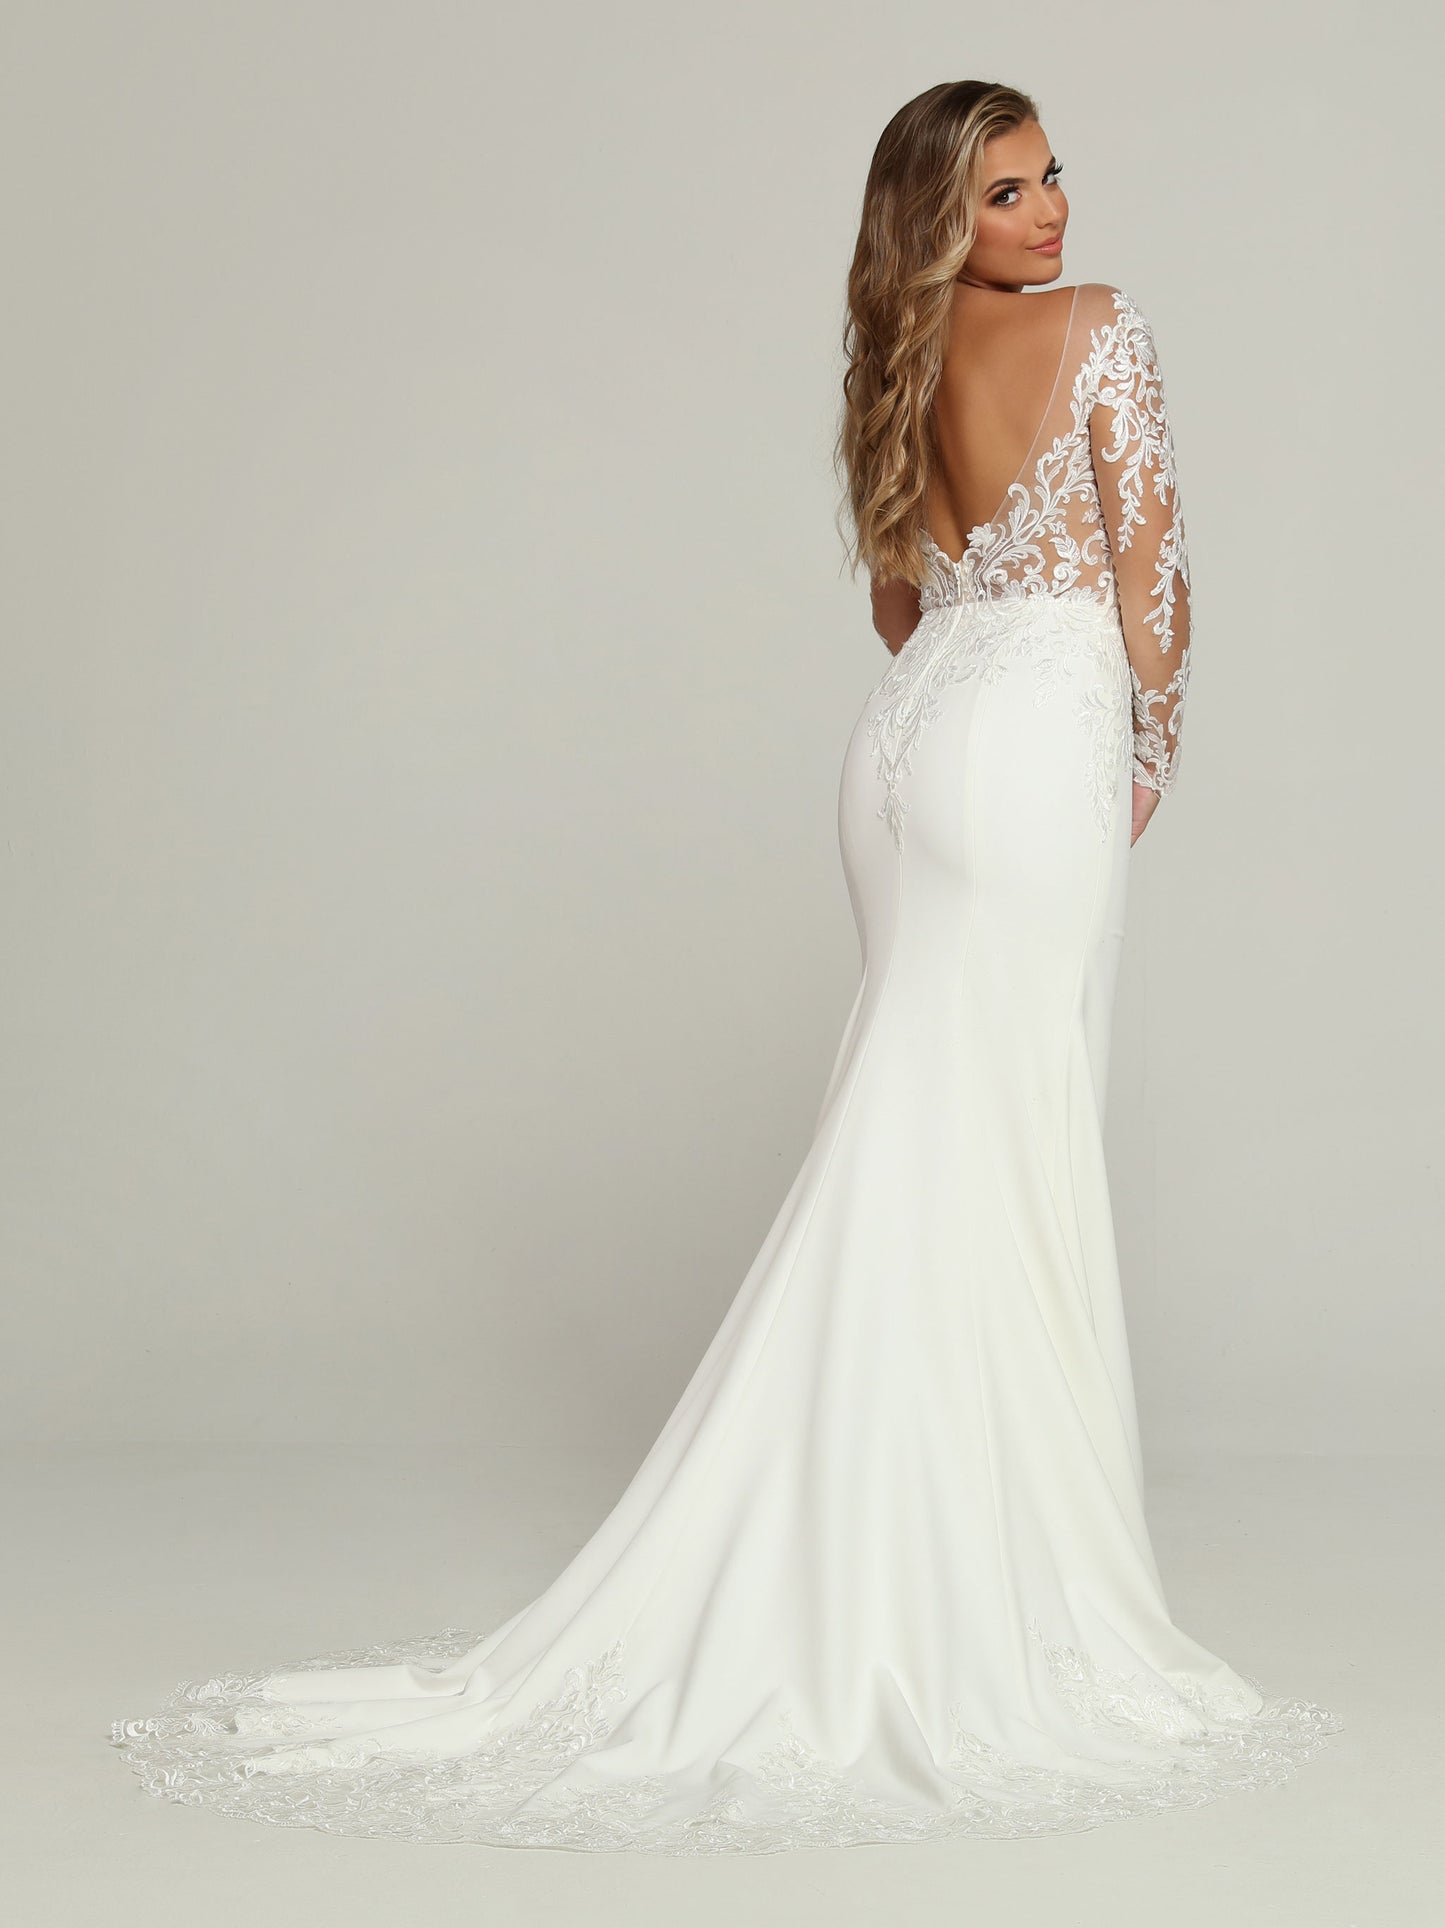 Davinci Bridal 50701 Long Sleeve Sheer Lace Wedding Dress Train off the Shoulder Bridal Gown This Stunning Soft Satin Sheath Fit & Flare Wedding Dress Wedding Dress features a Sheer Bateau Neckline above a Sweetheart Bodice. Lace Applique Accents the Full-Length Sheer Sleeves & Sheer Low V-Back. The Skirt finishes with a Sheer Lace Chapel Train.